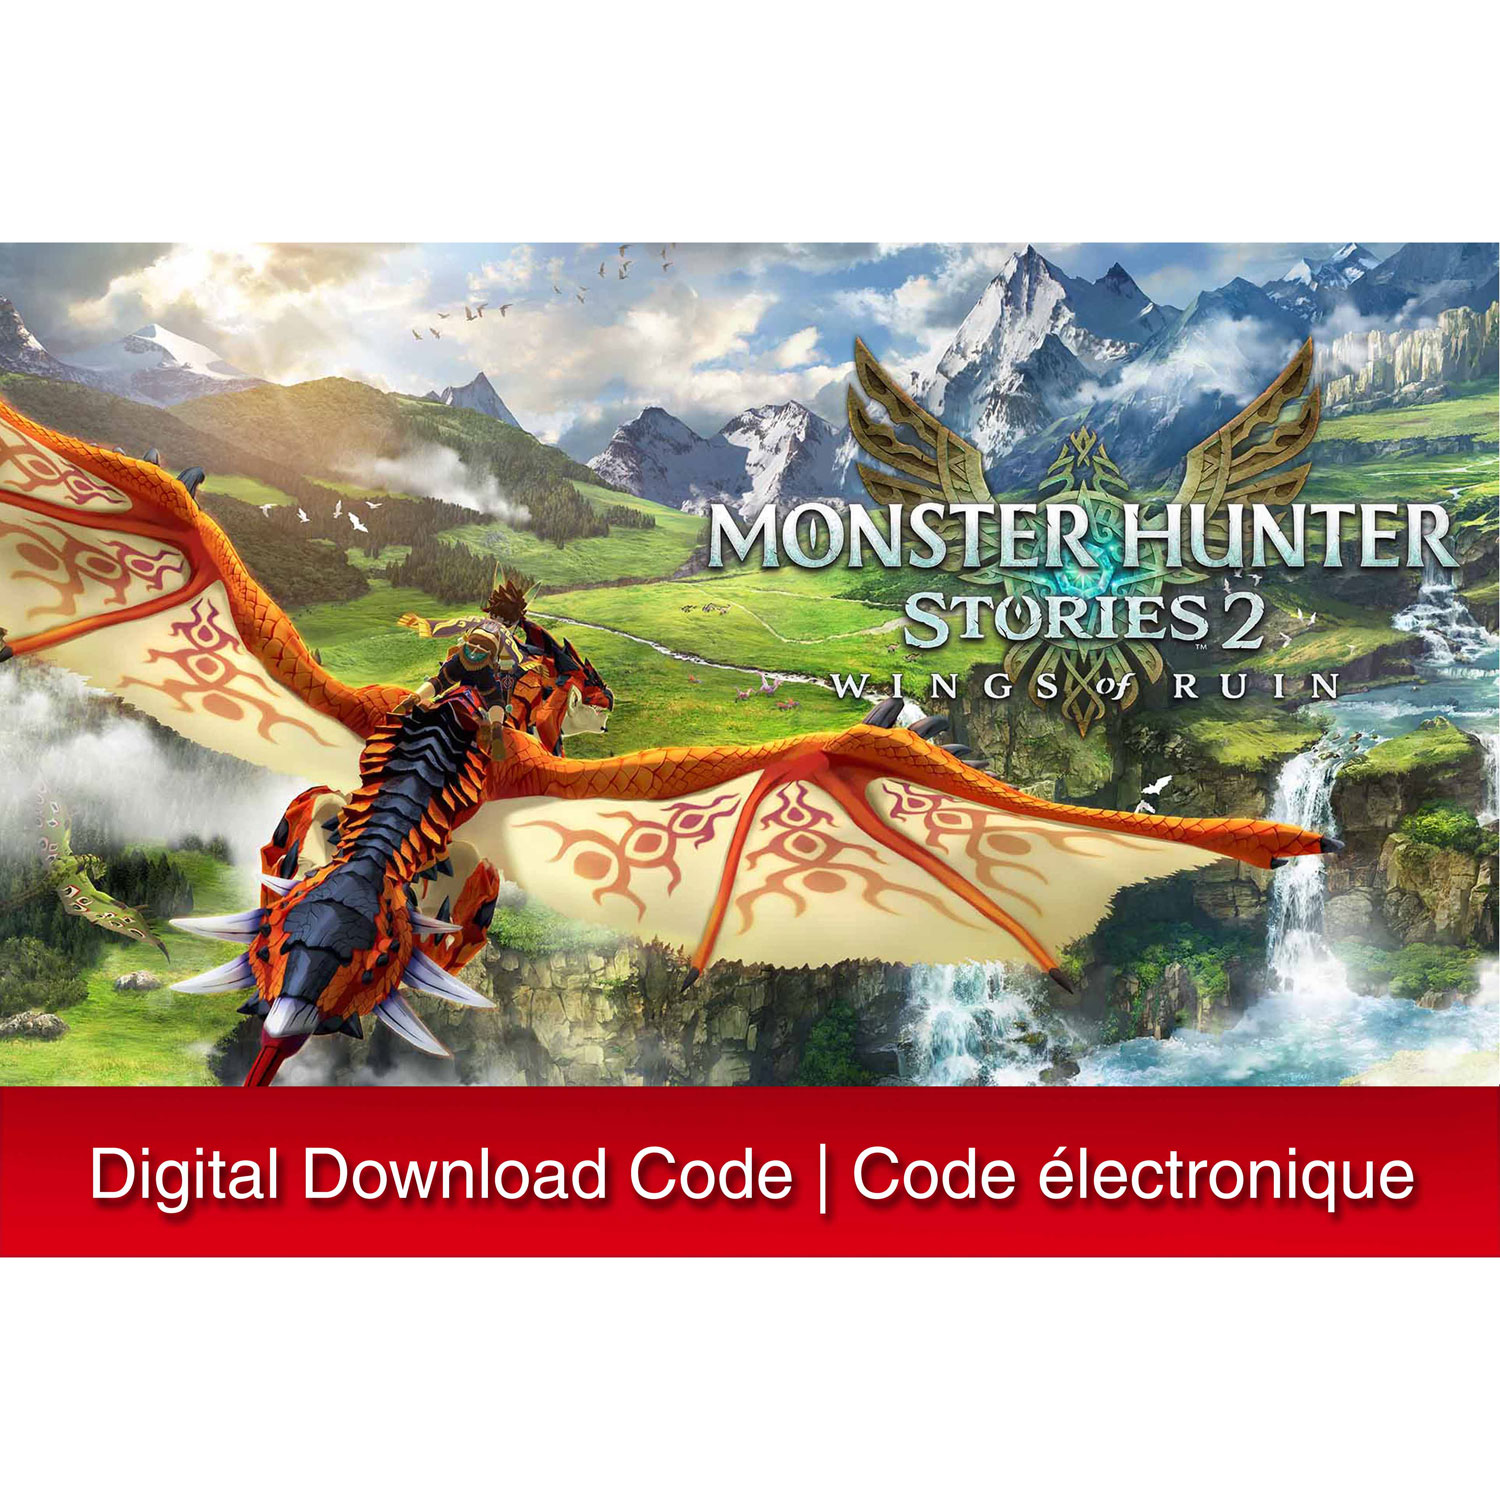 Monster Hunter Stories 2: Wings of Ruin (Switch) - Digital Download